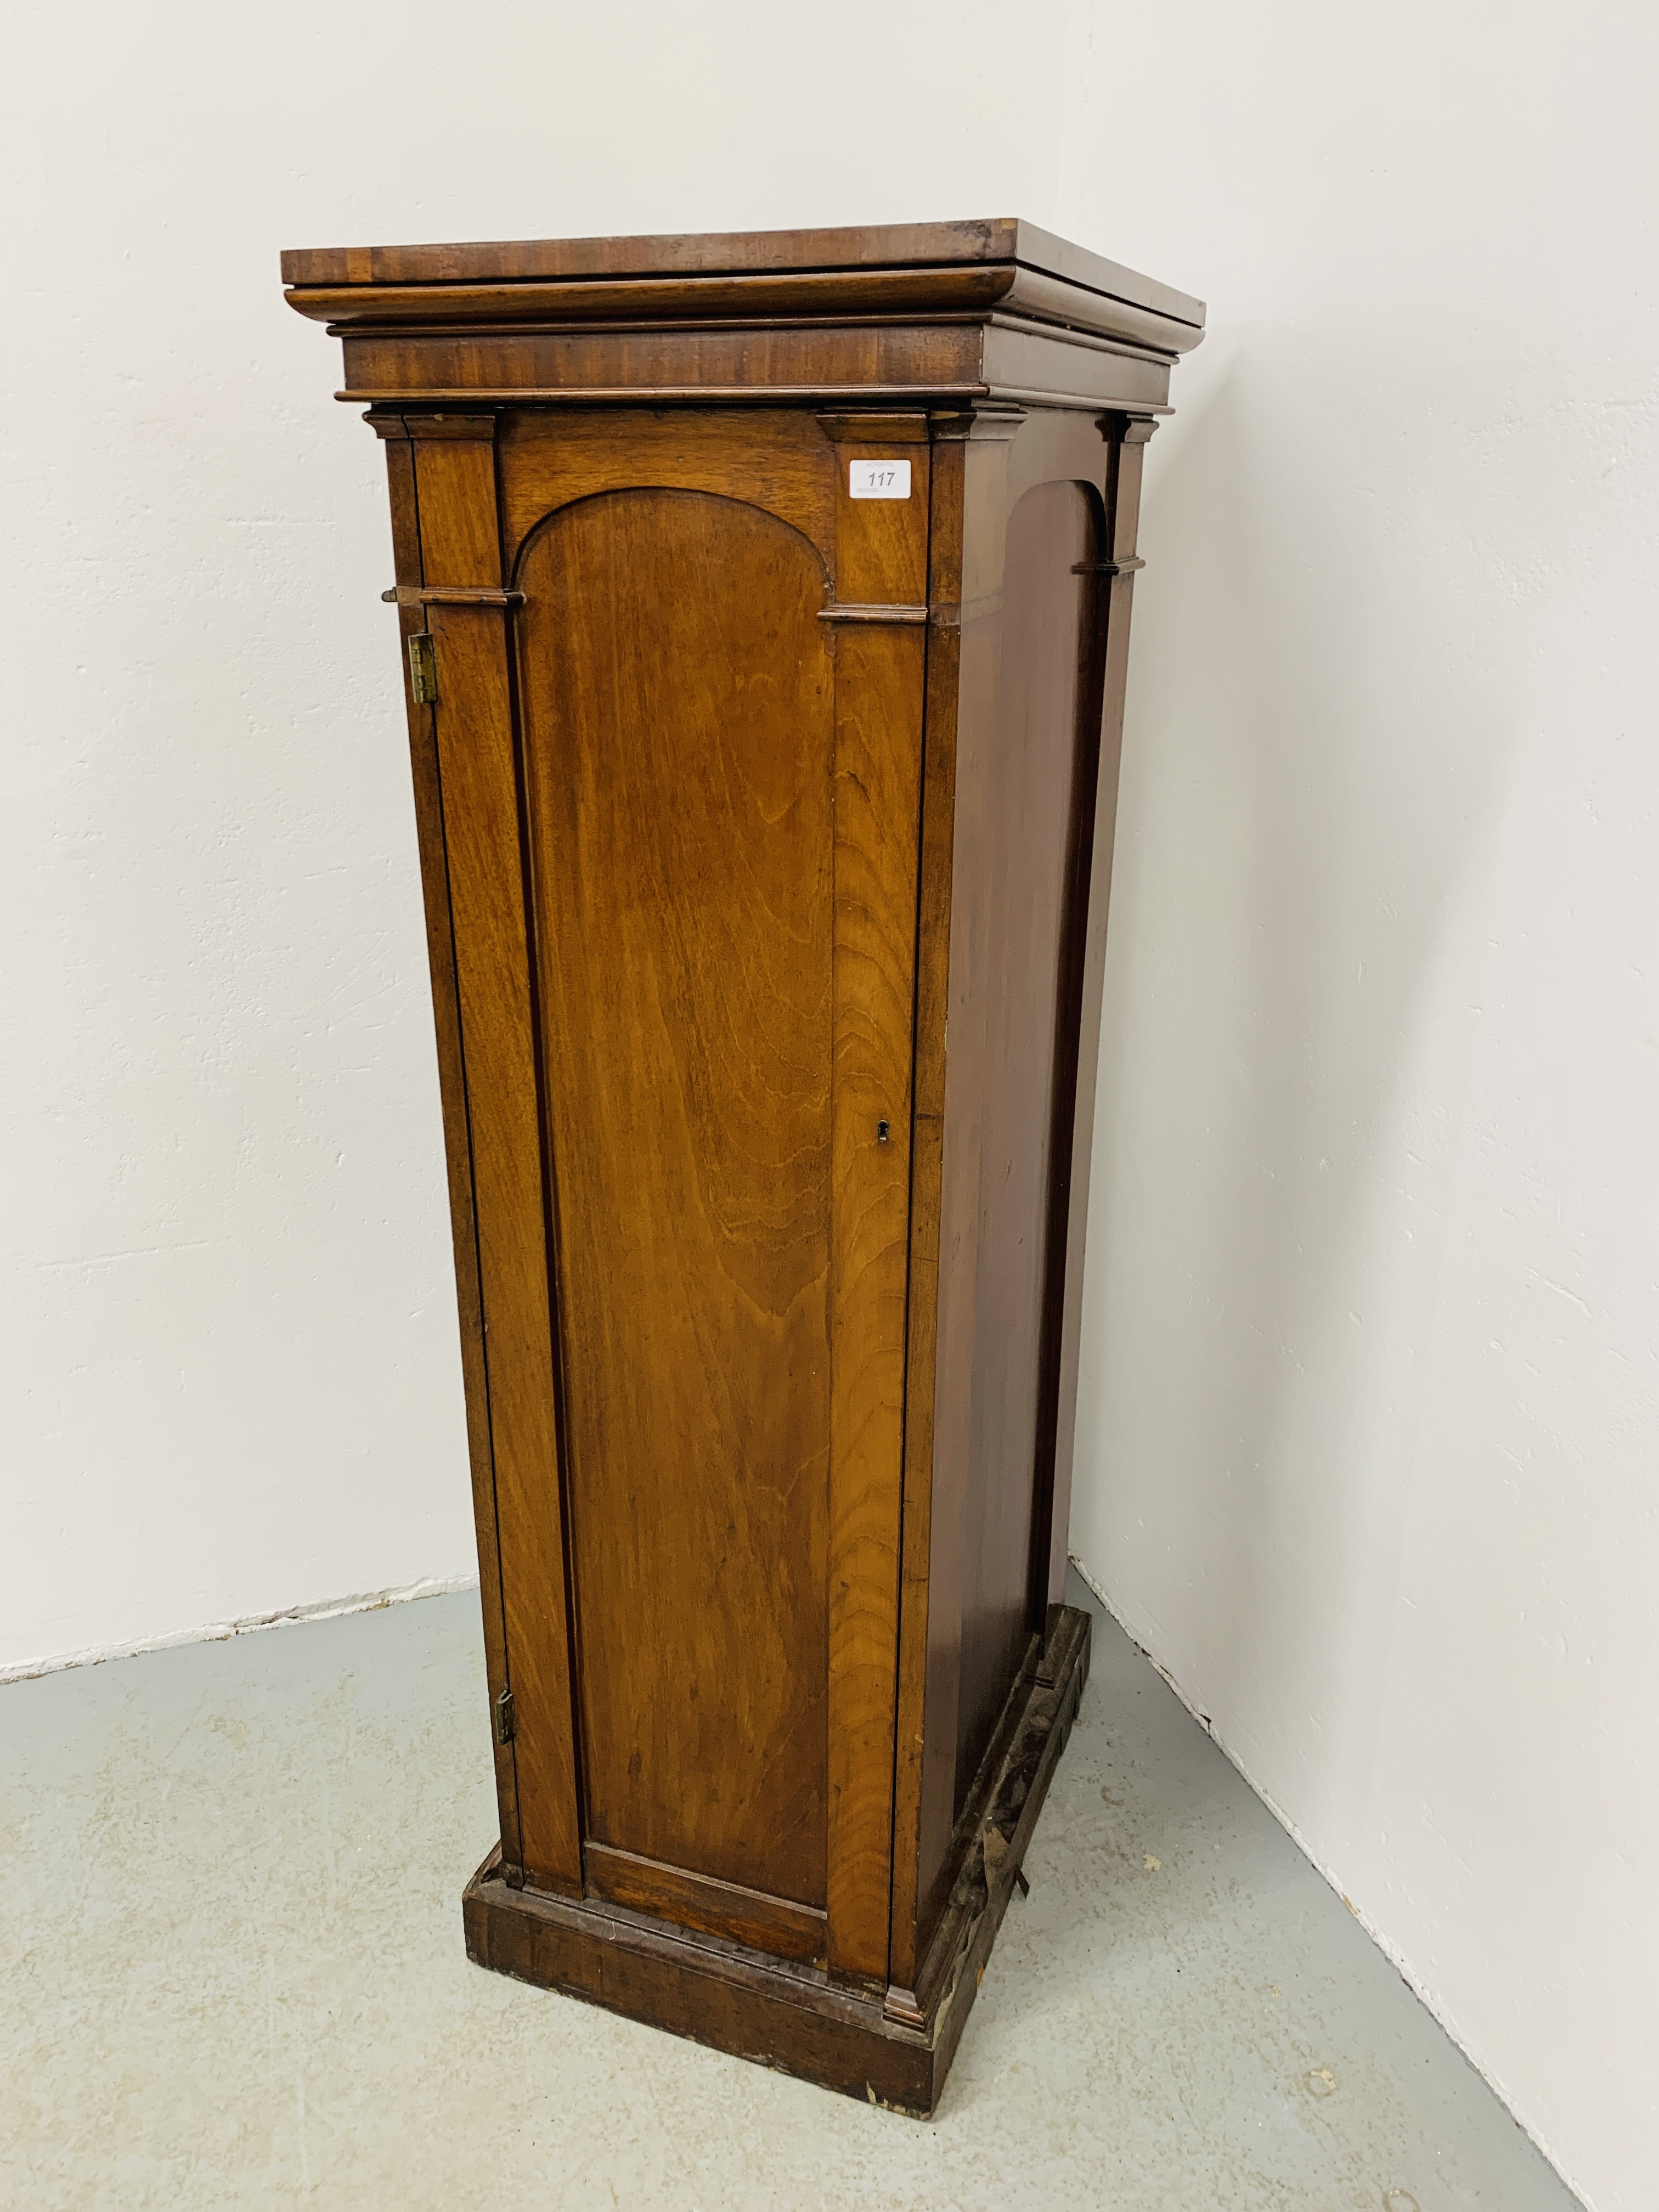 AN EARLY C19TH MAHOGANY SINGLE DOOR PEDESTAL (PART OF A LARGER PIECE) ENCLOSING SEVEN DRAWERS